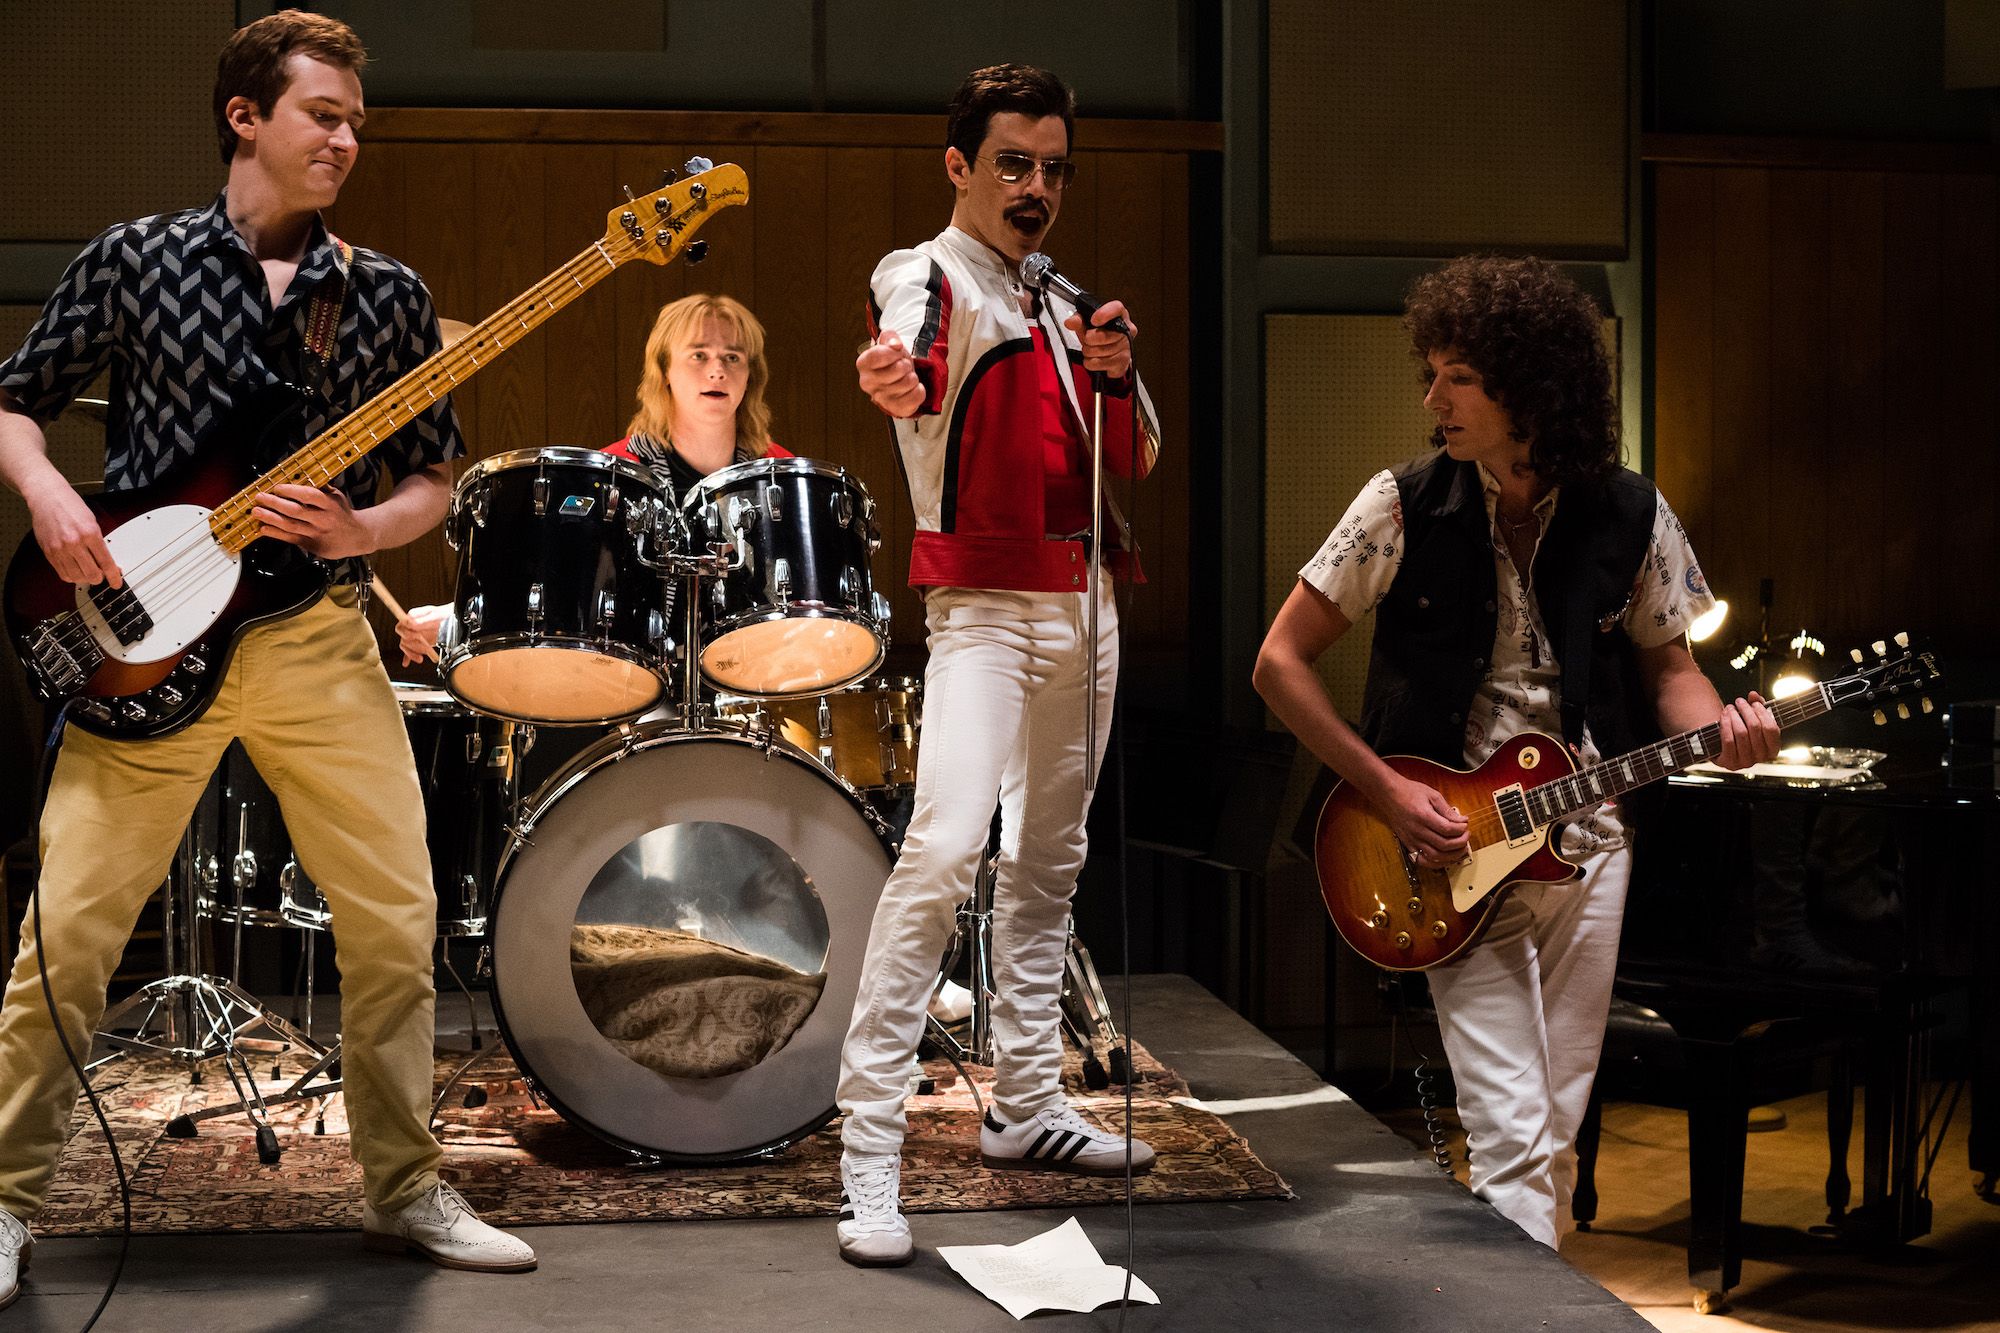 Bohemian Rhapsody Deleted Scenes: Here's What Was Cut from Film | Collider